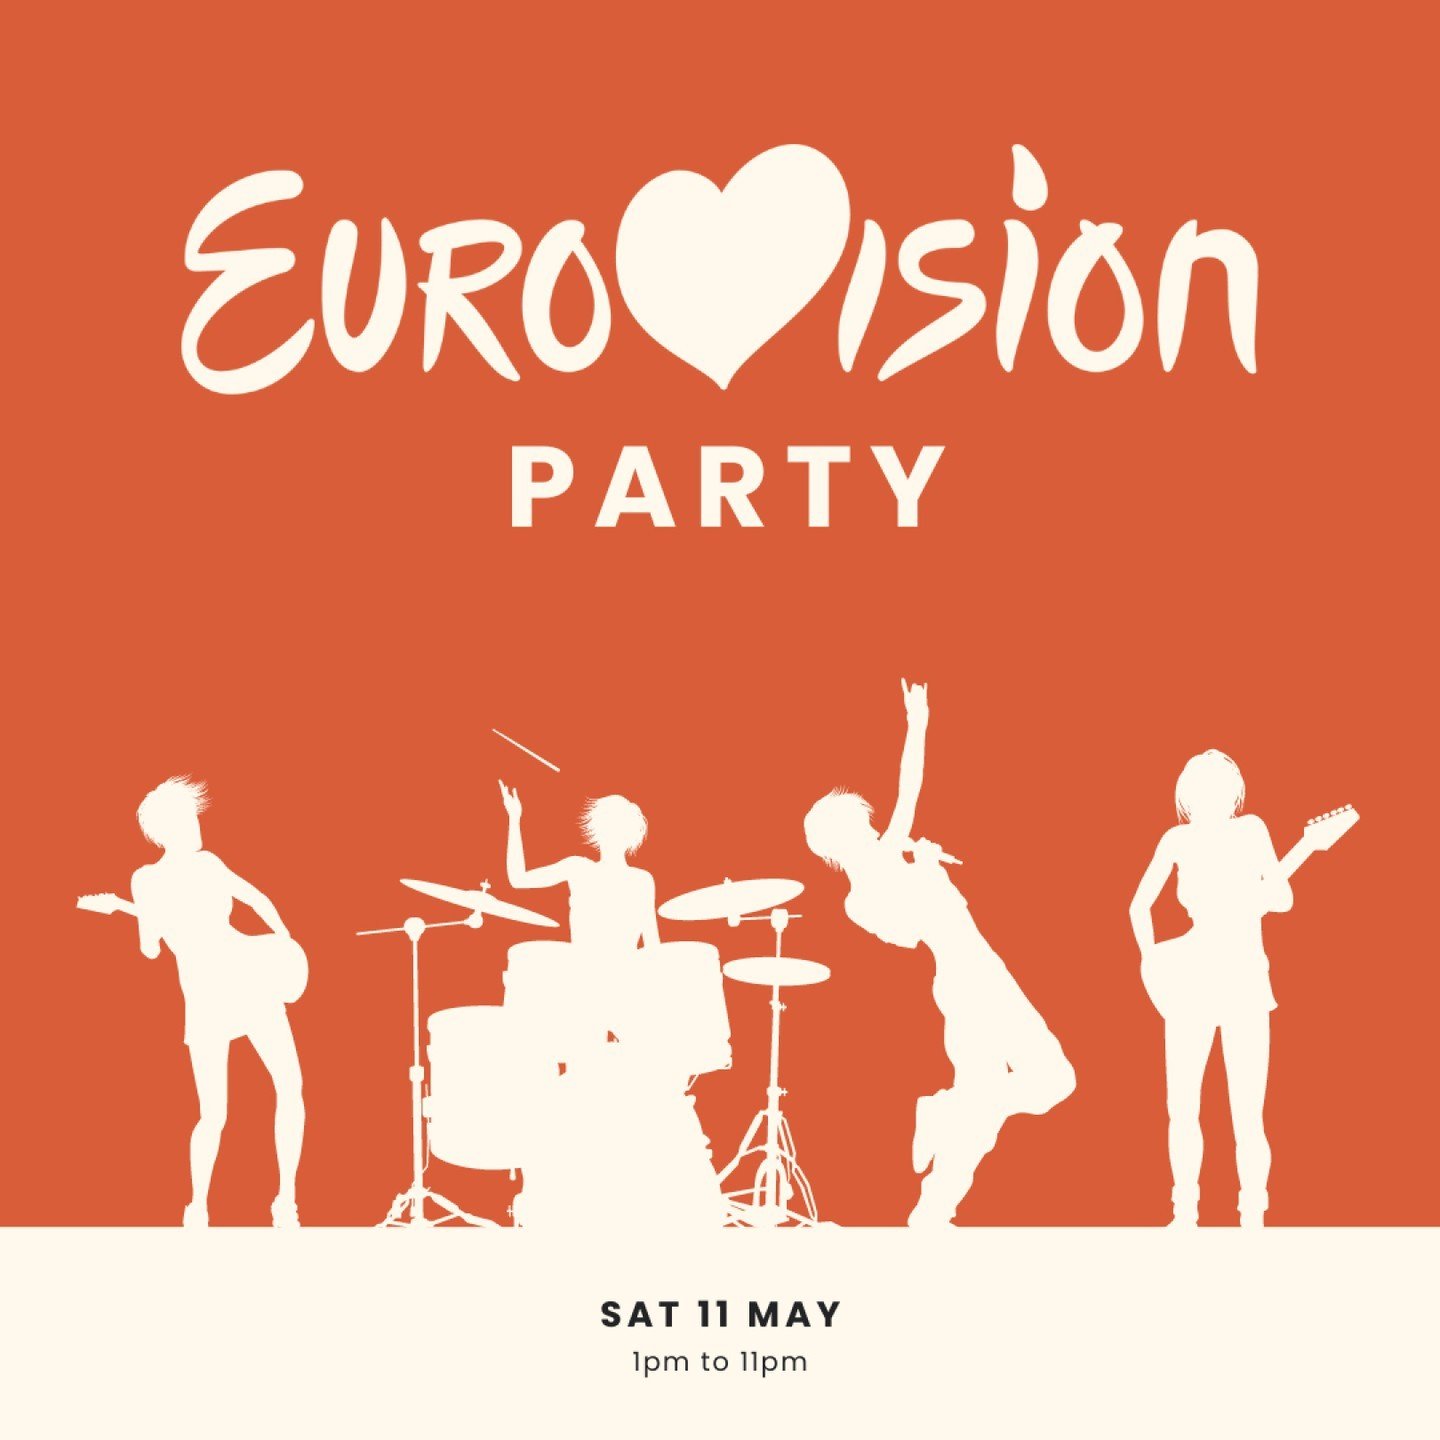 💃🕺 EUROFEST 🕺💃⁠

Eurovision + traditional european spirits = we think it's a match made in heaven.

Our friends @boneheadbrewingau are throwing an epic Eurofest party on Saturday, and we're bringing a bunch of our European inspired spirits to add